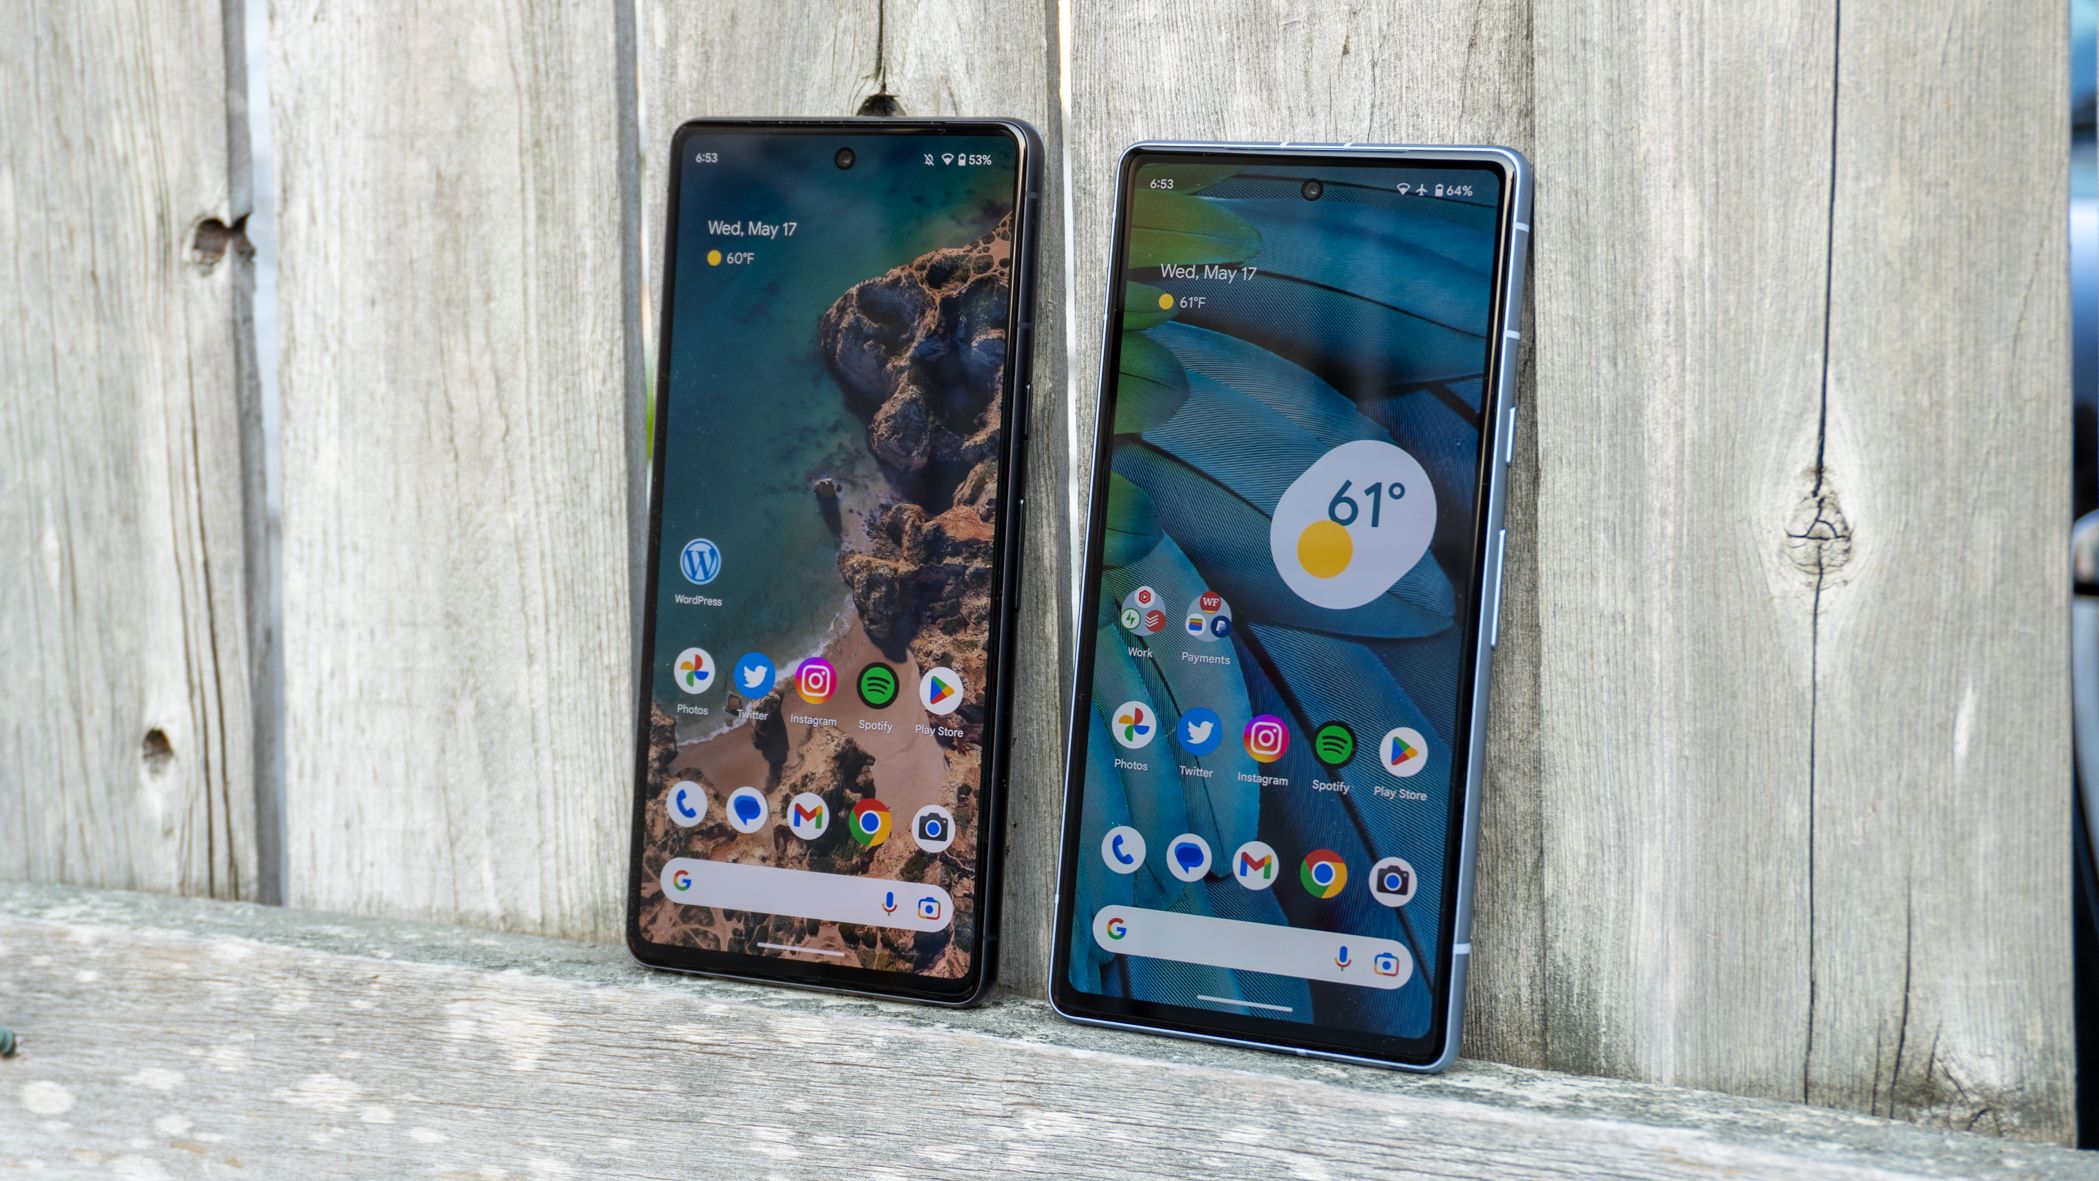 Google Pixel 7a vs. Pixel 7: What's the difference?